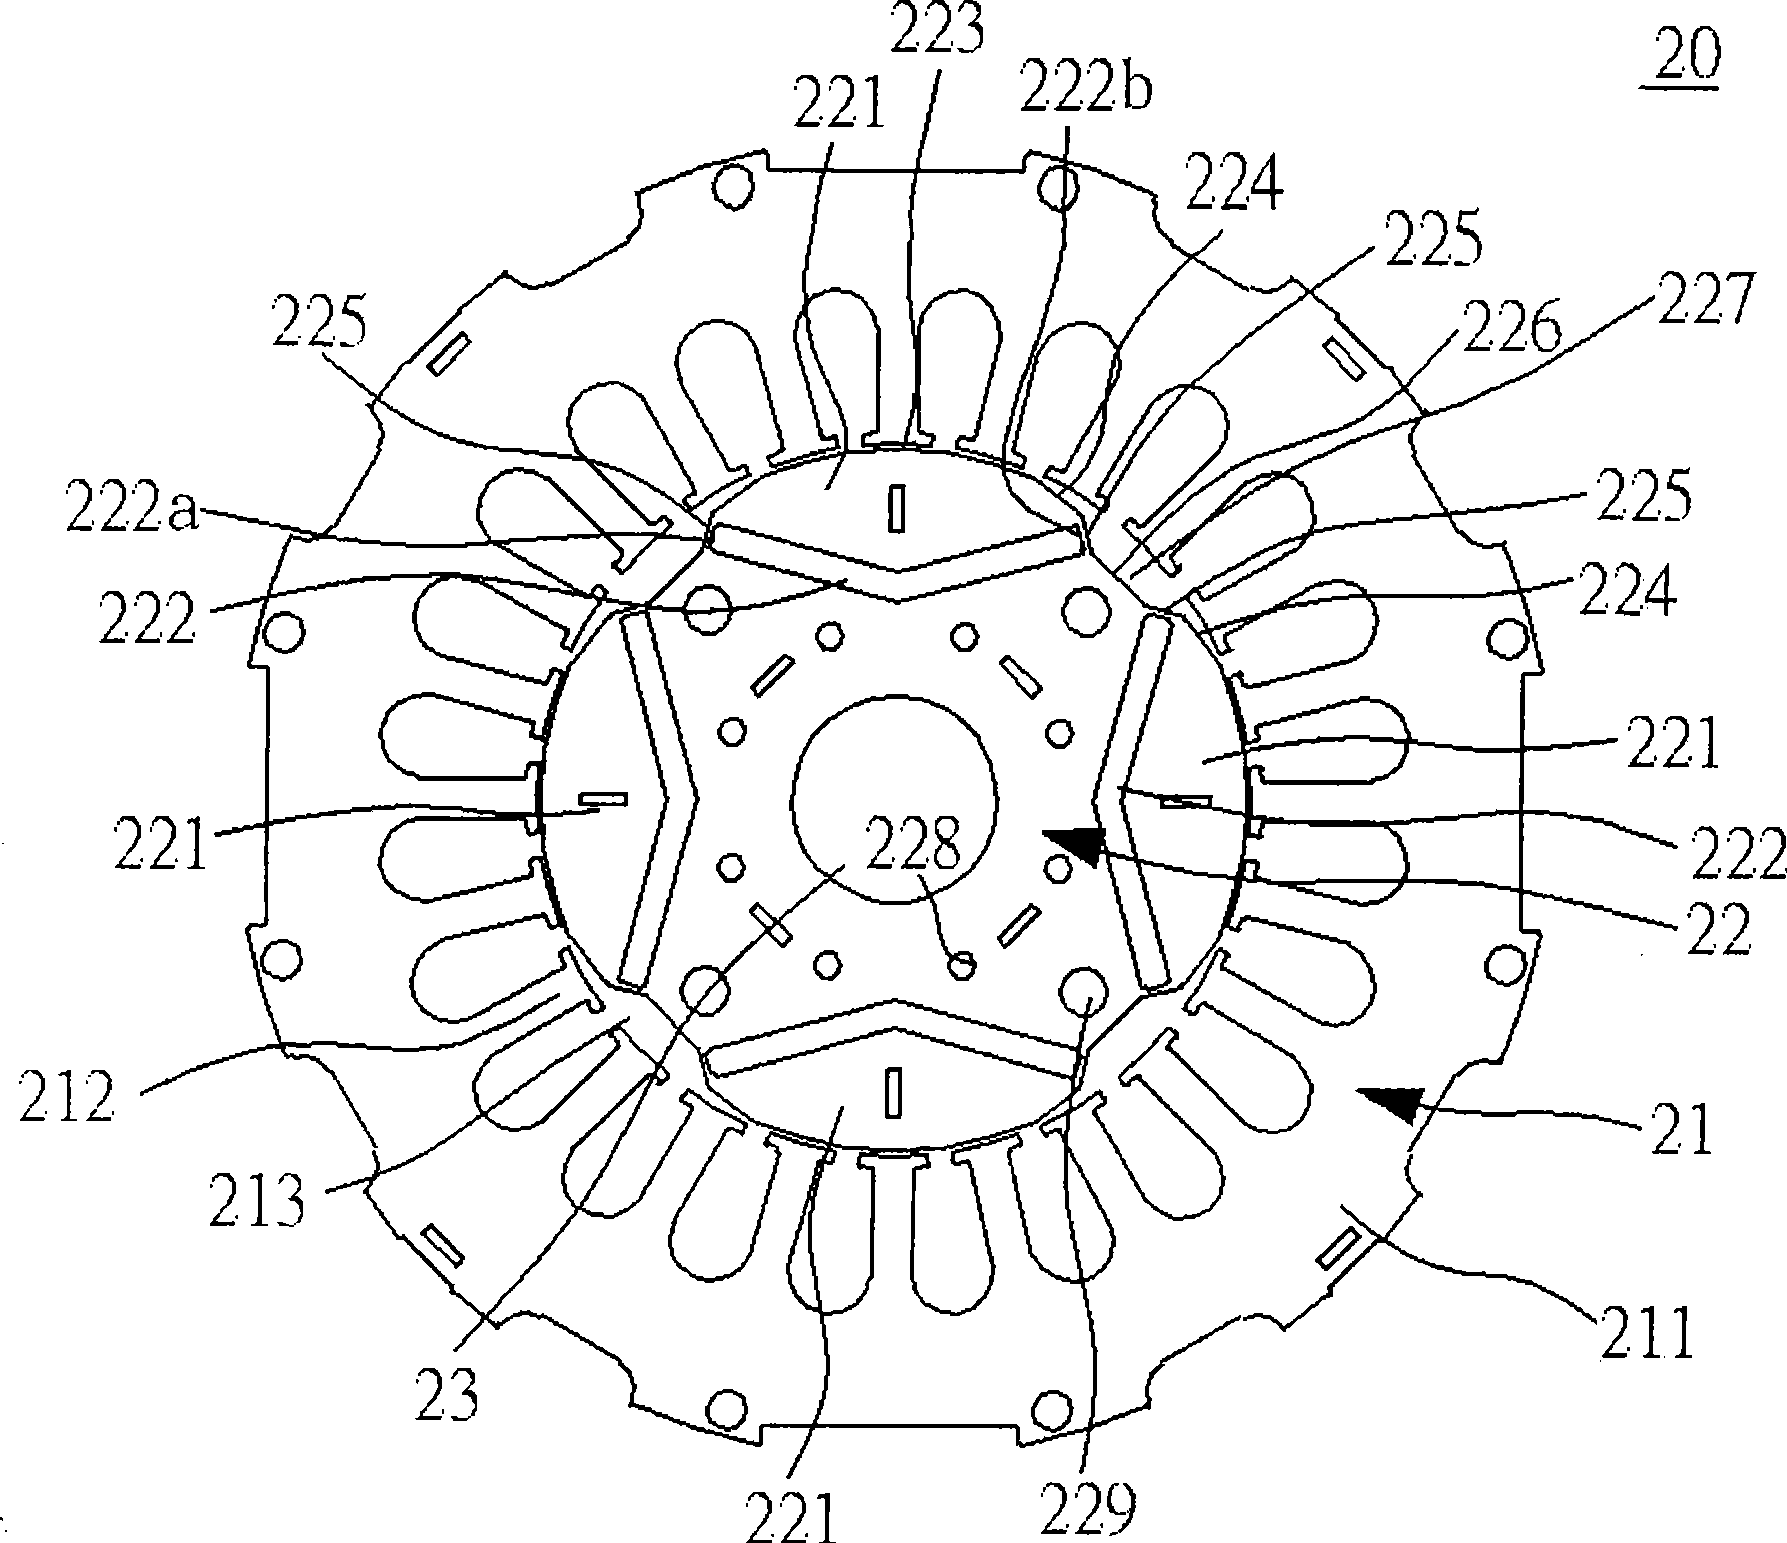 Permanent-magnetic electric motor